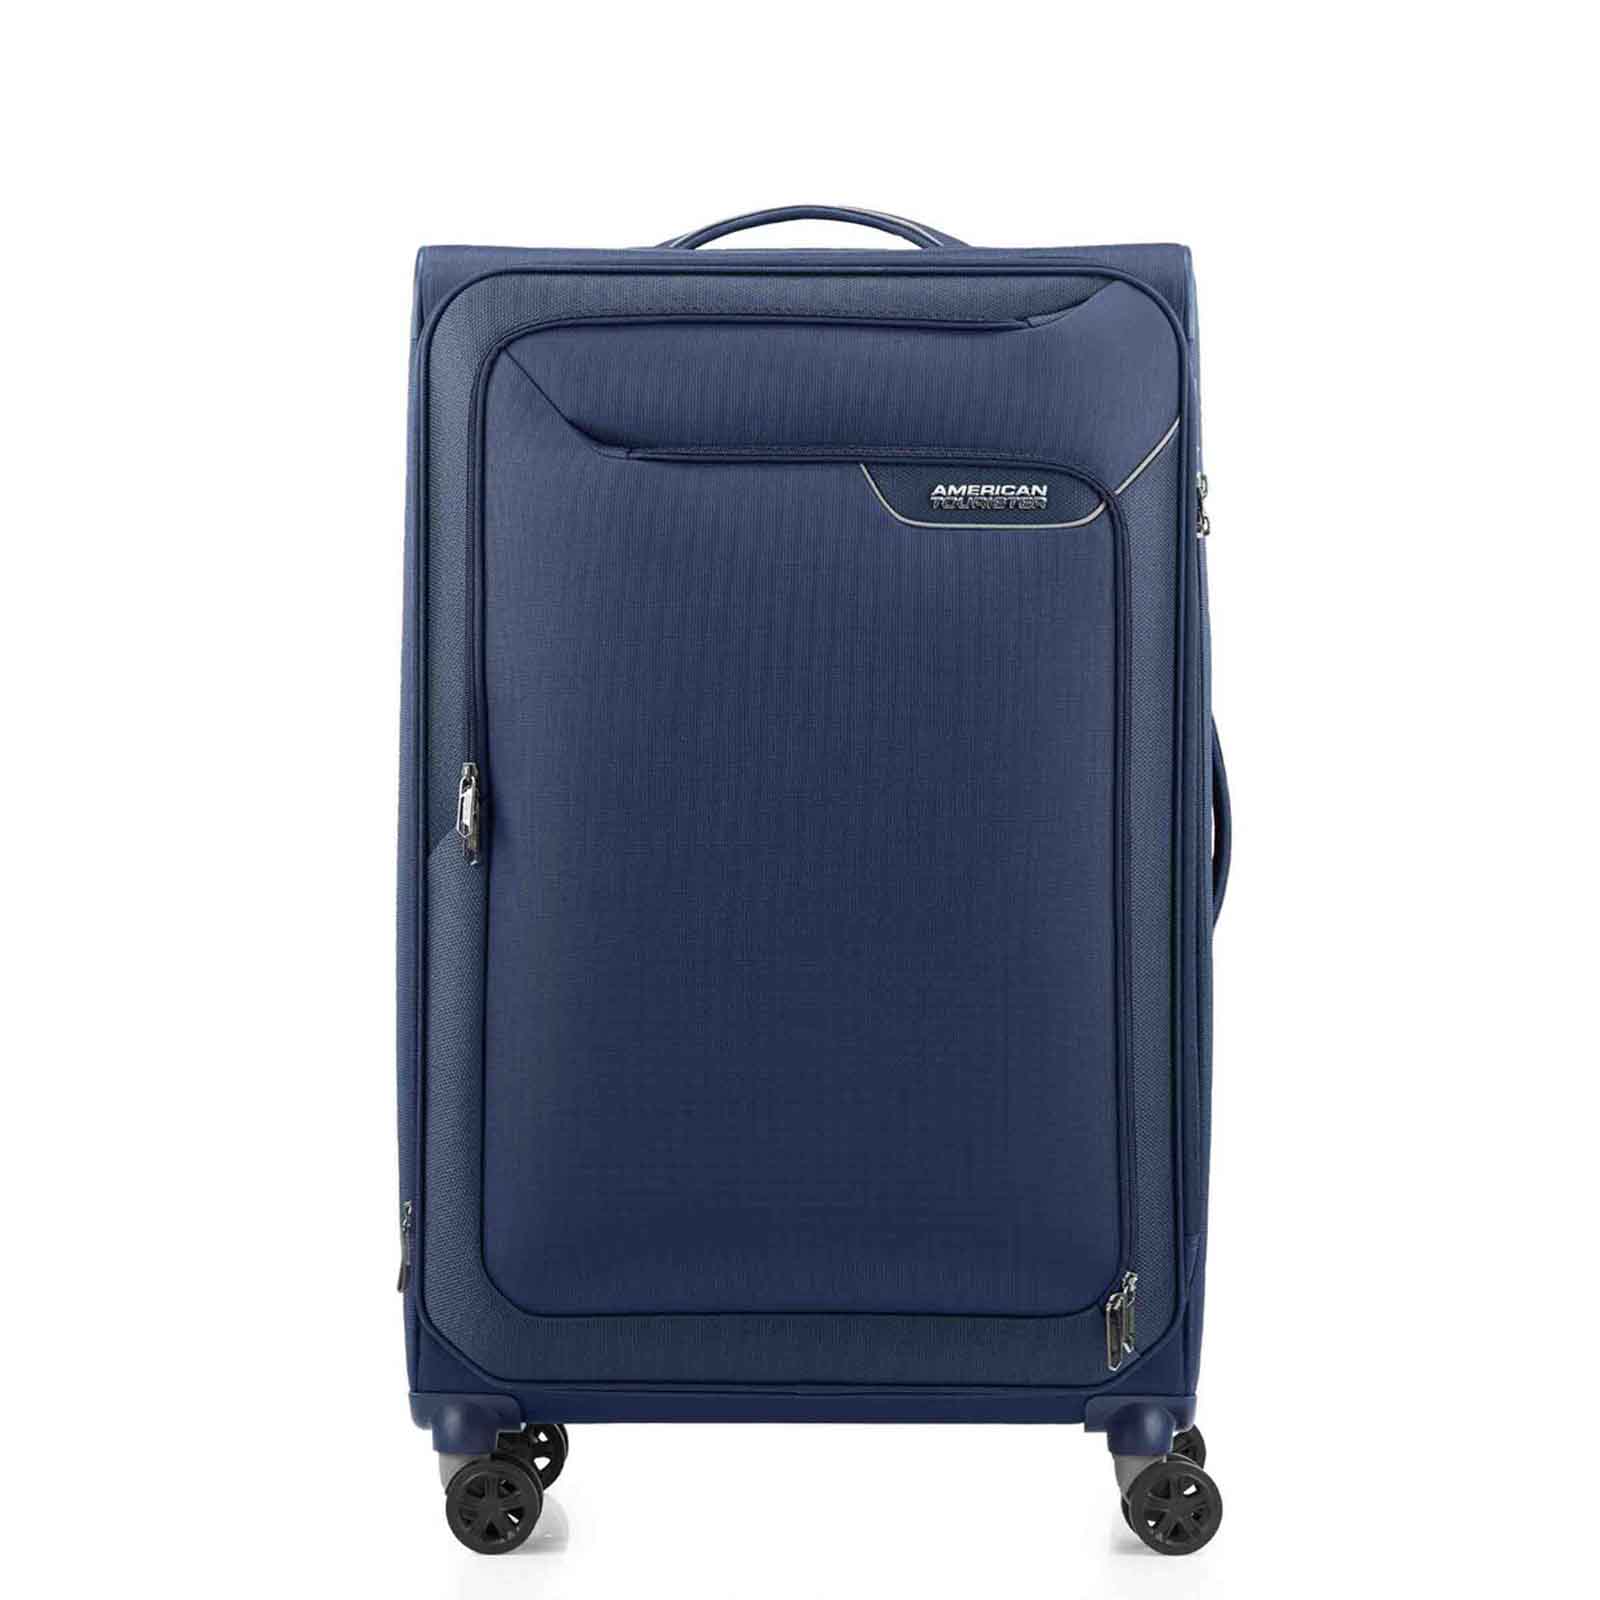 American-Tourister-Applite-4-Eco-82cm-Suitcase-Navy-Front